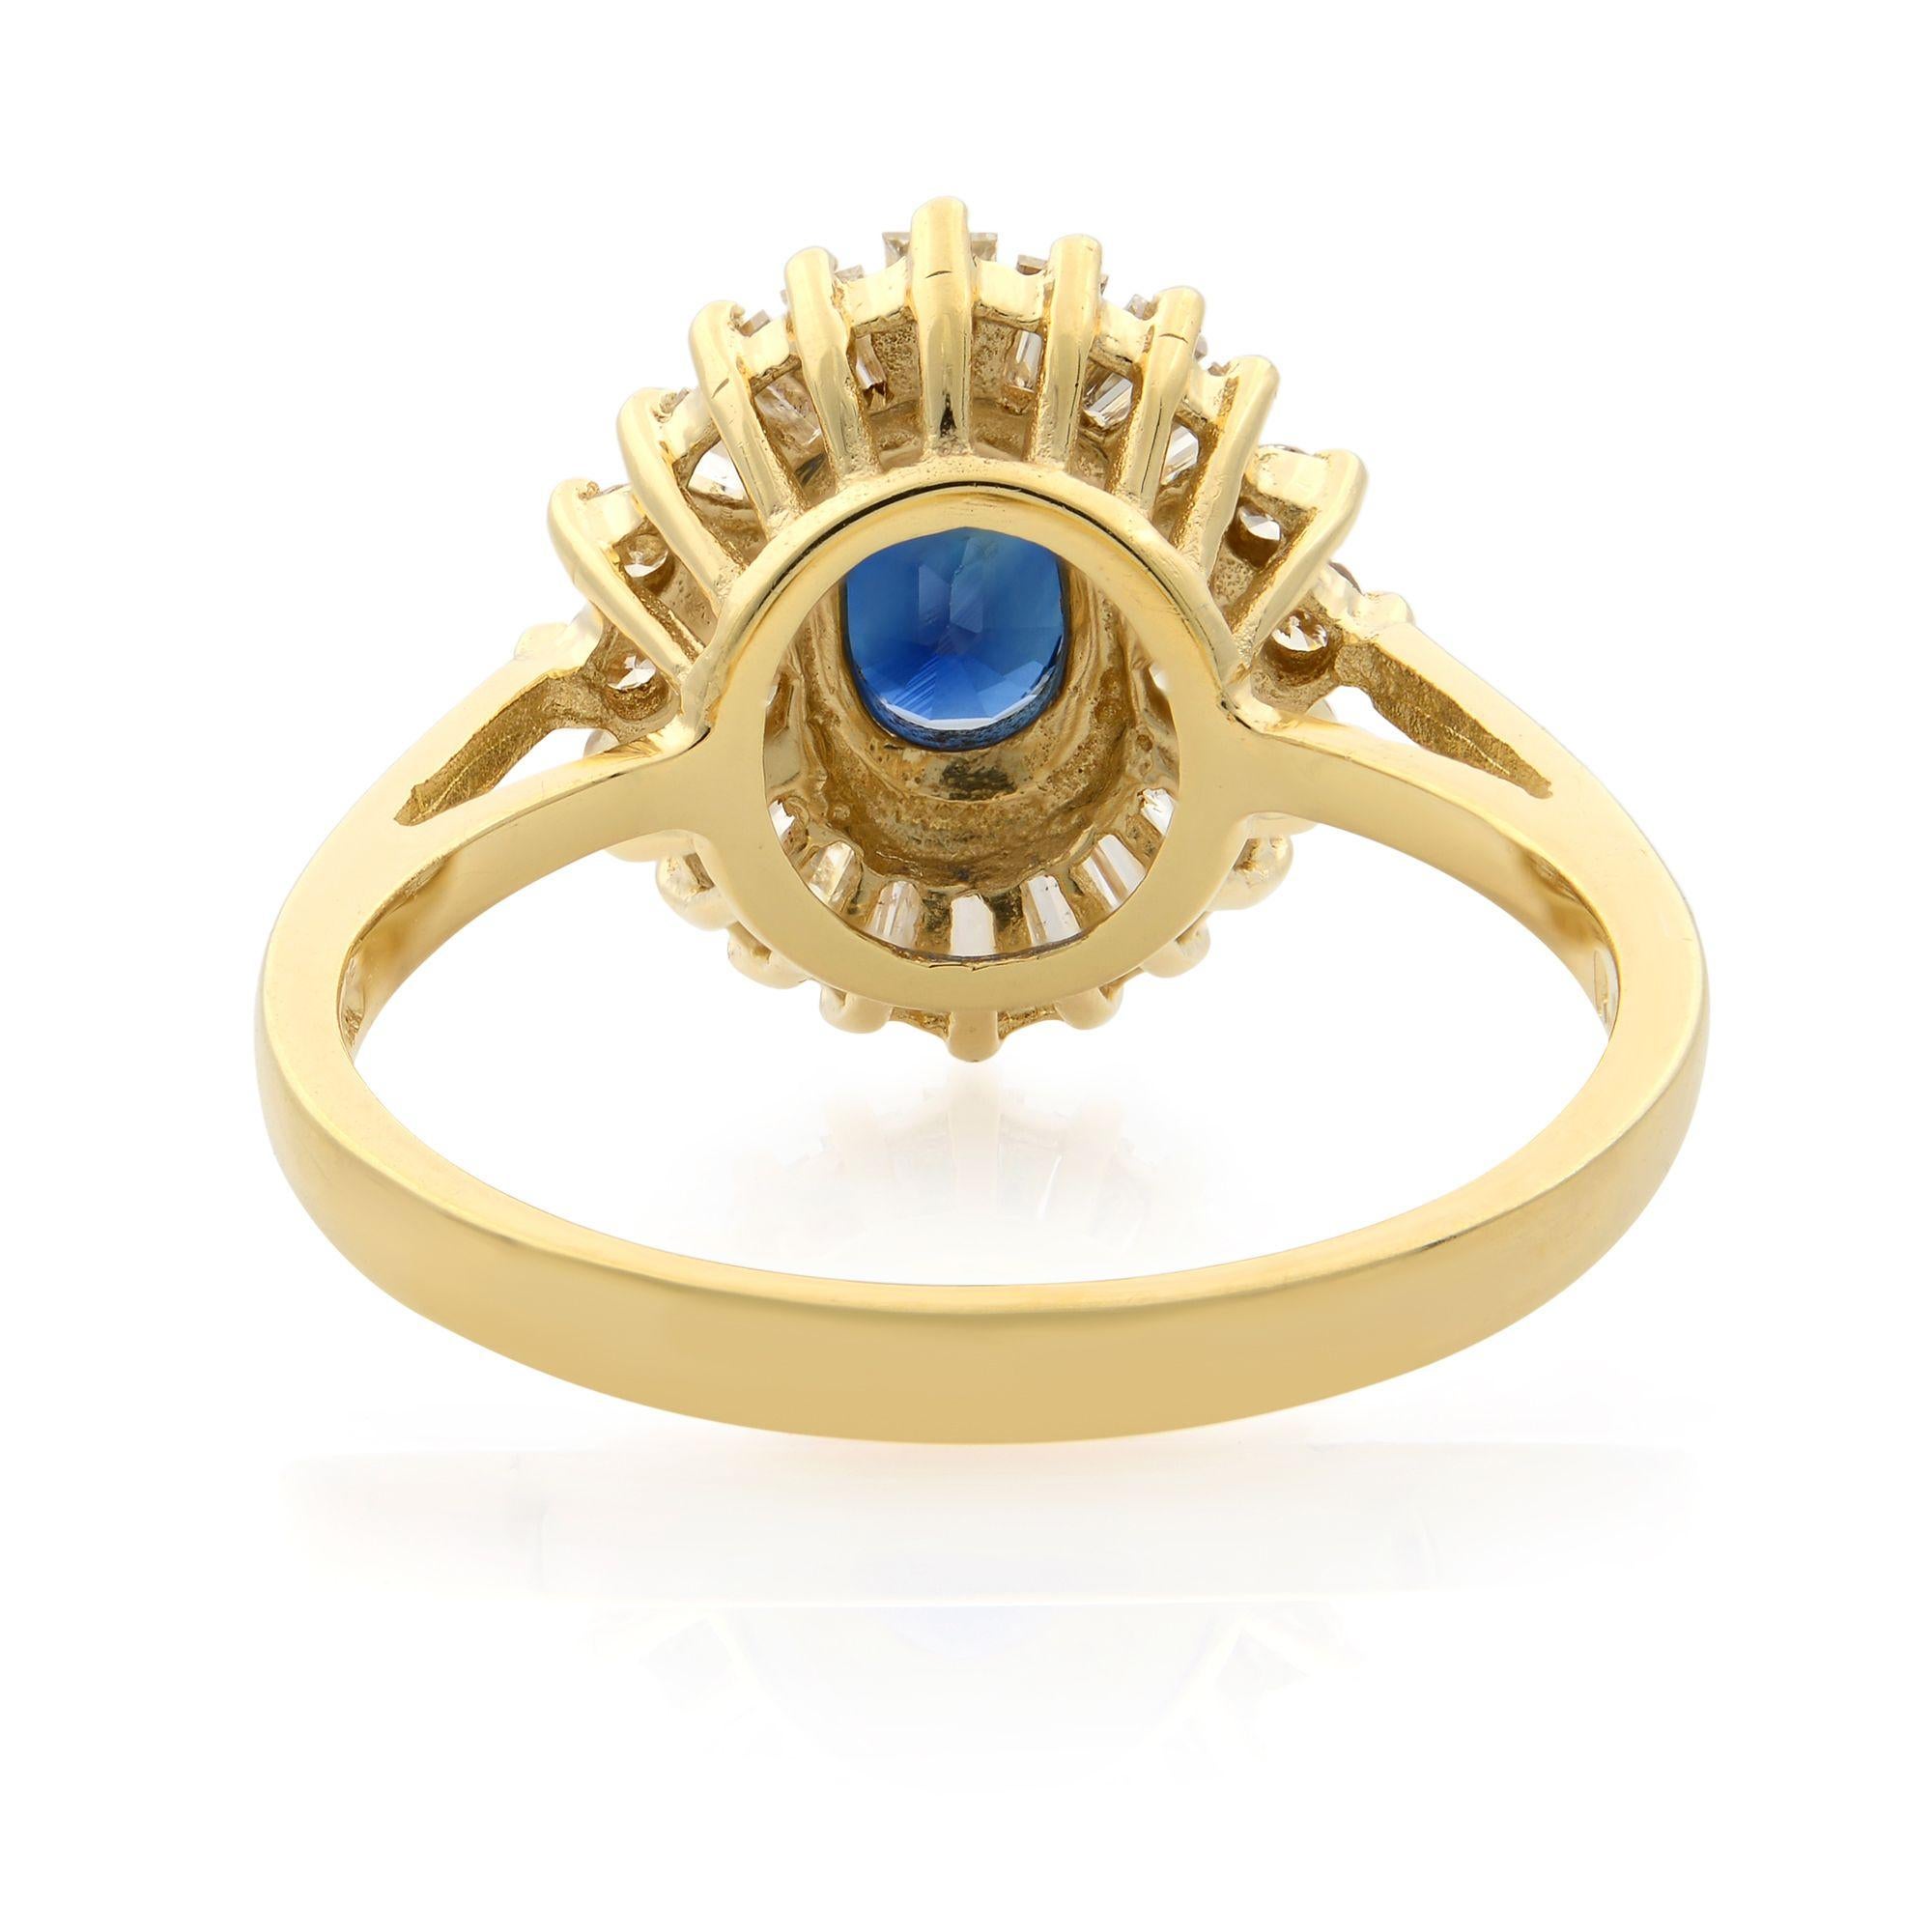 Rachel Koen Oval Sapphire Diamond Engagement Ring 14k Yellow Gold In New Condition For Sale In New York, NY